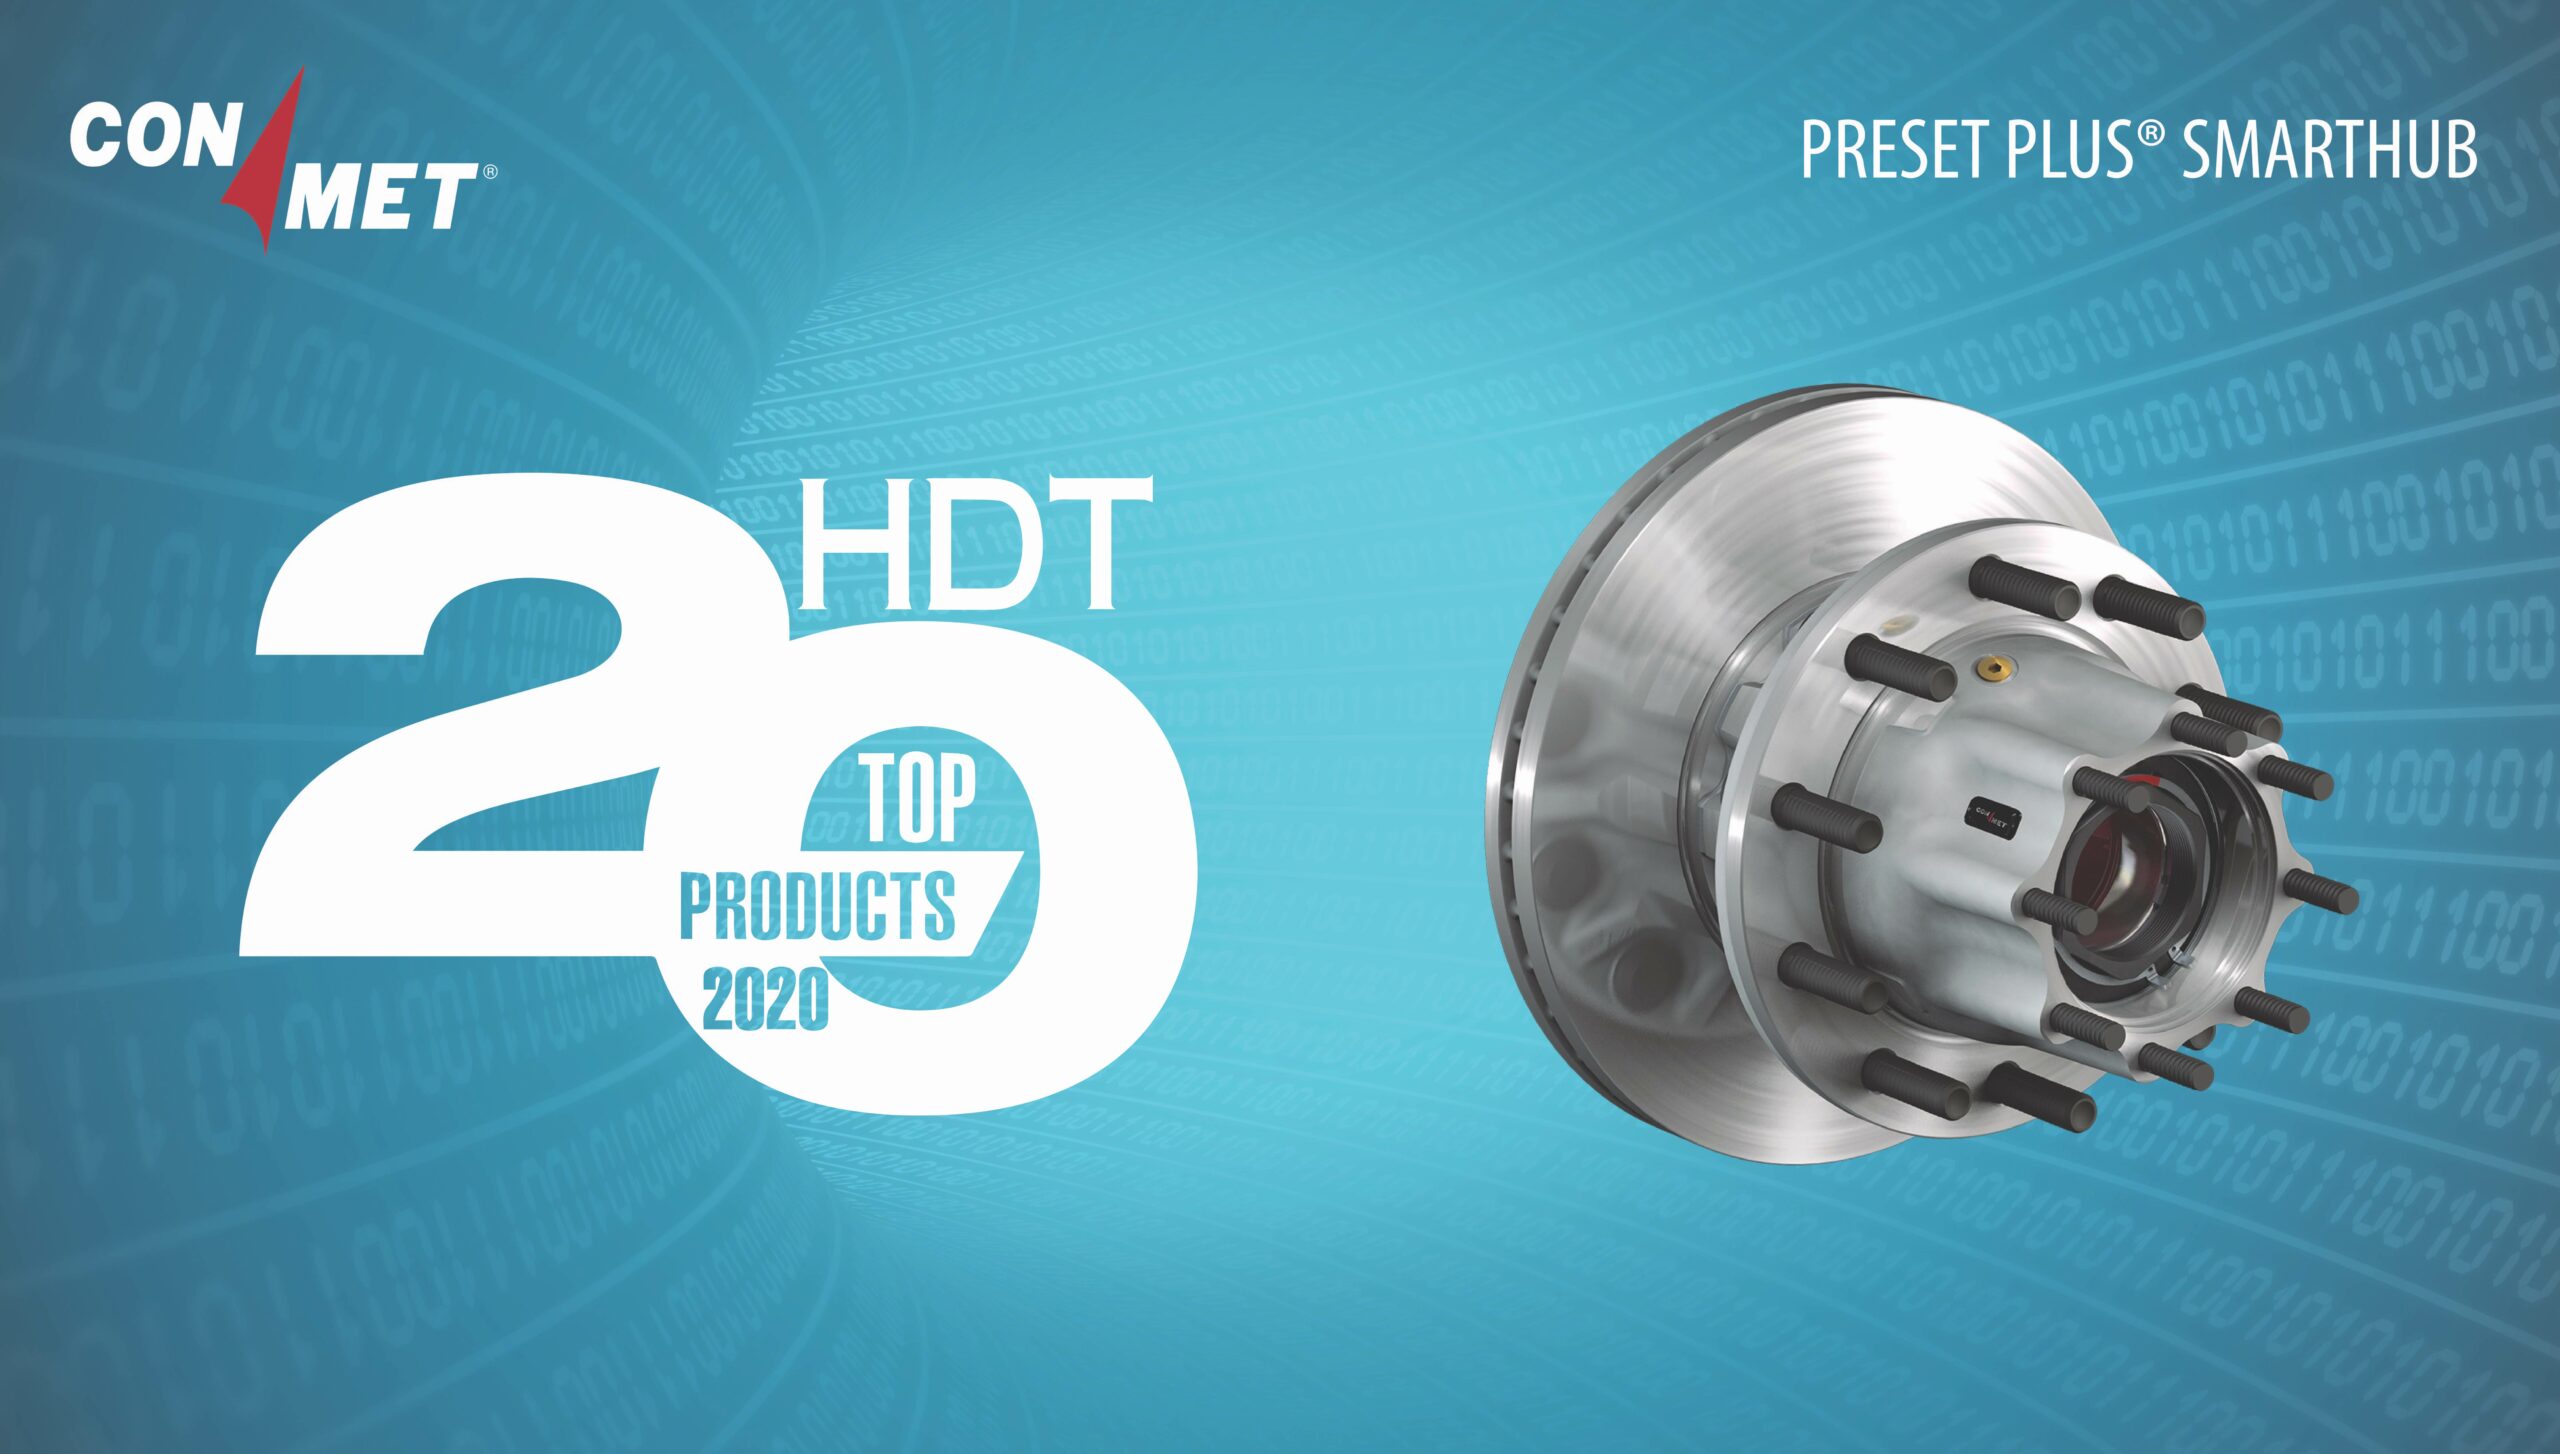 PreSet Plus® SmartHub™ Among HDT’s Top 20 Products of 2020